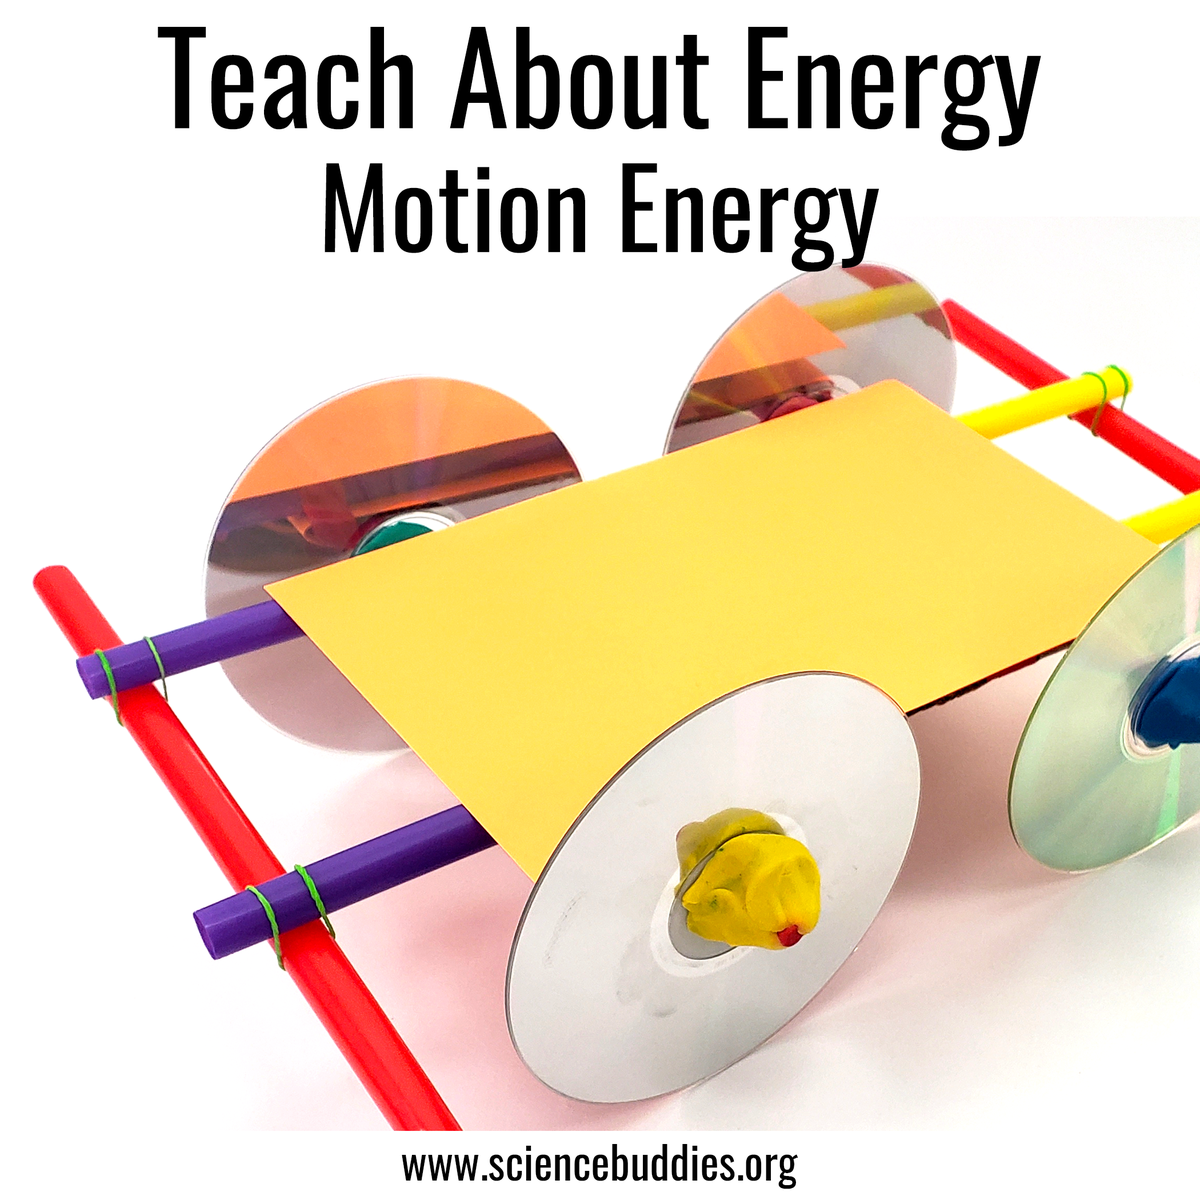 A homemade car to explore motion energy and Newton's laws - part of Energy Collection at Science Buddies